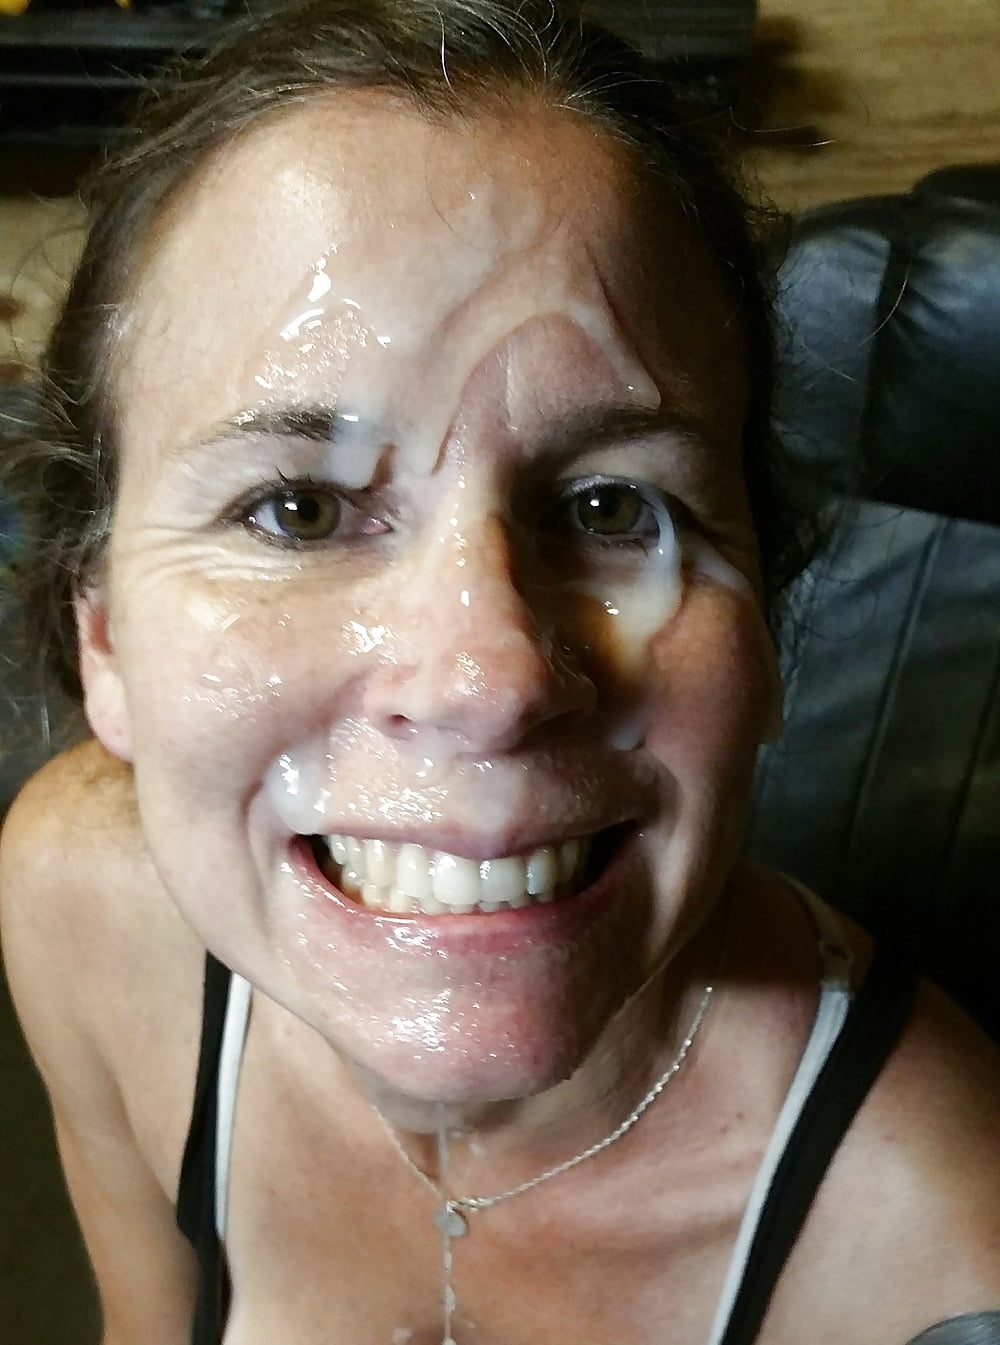 Wife is happy with a hot cum facial